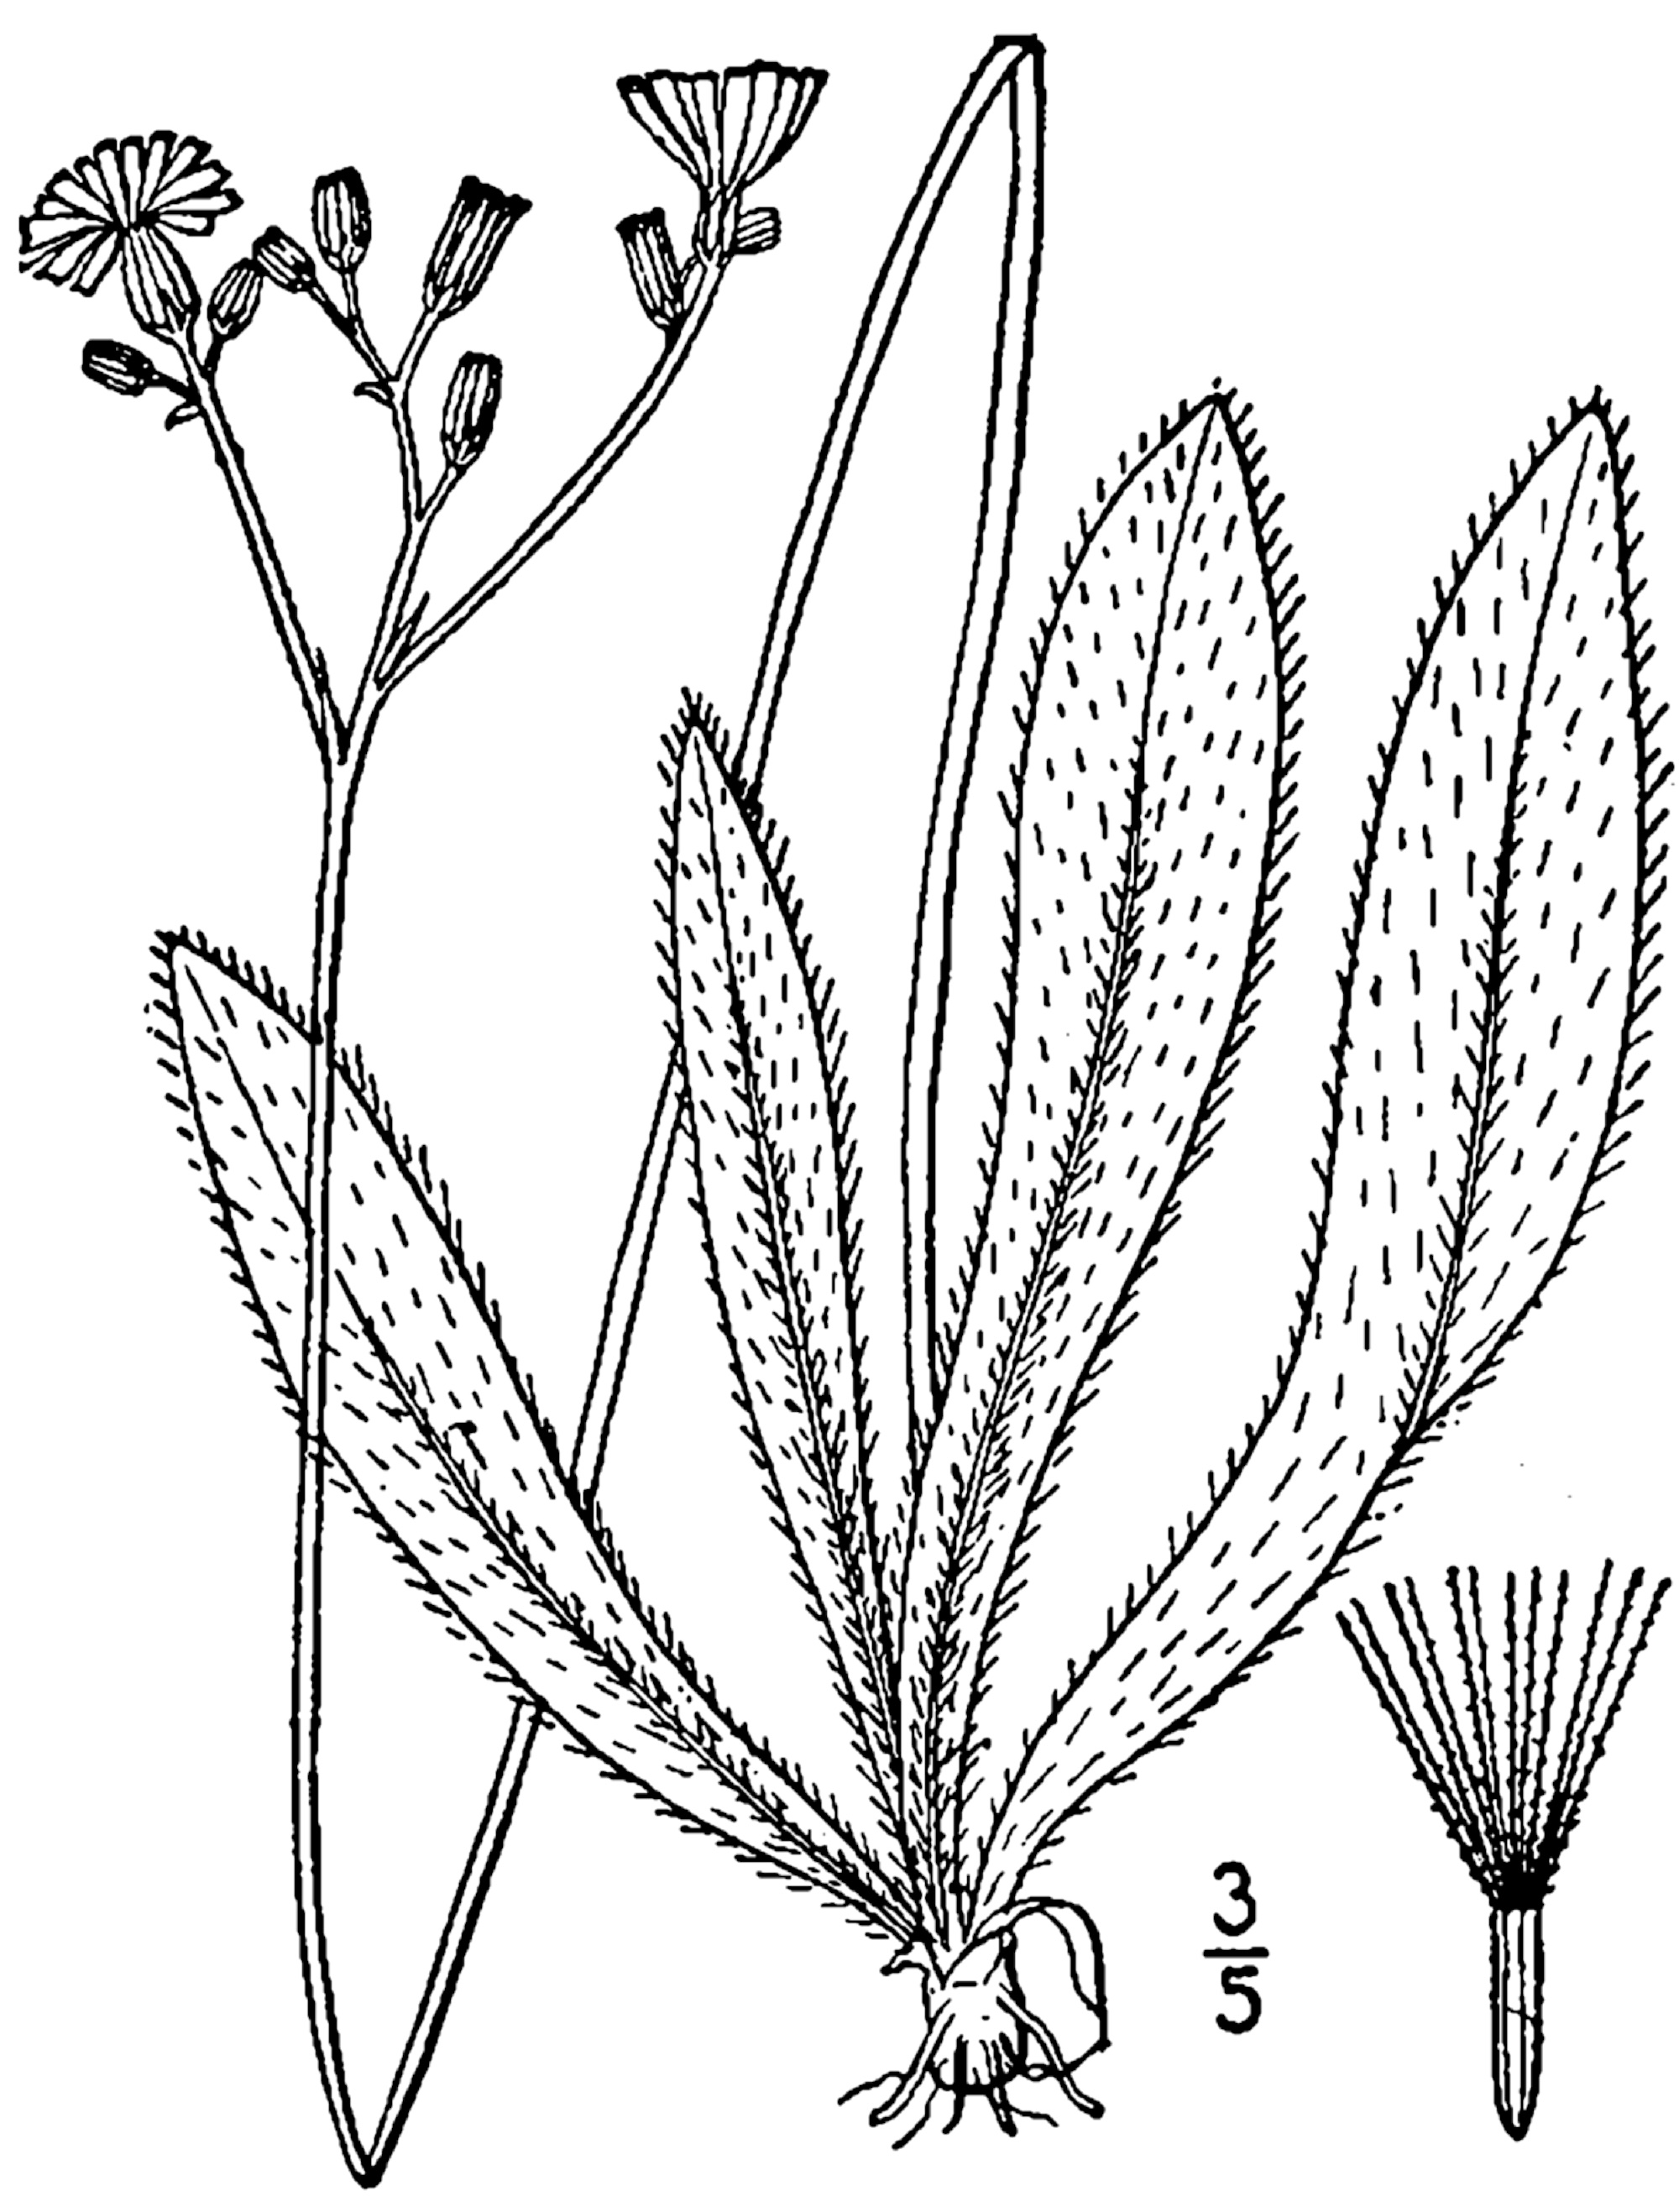 1913 line drawing of Hieracium piloselloides.